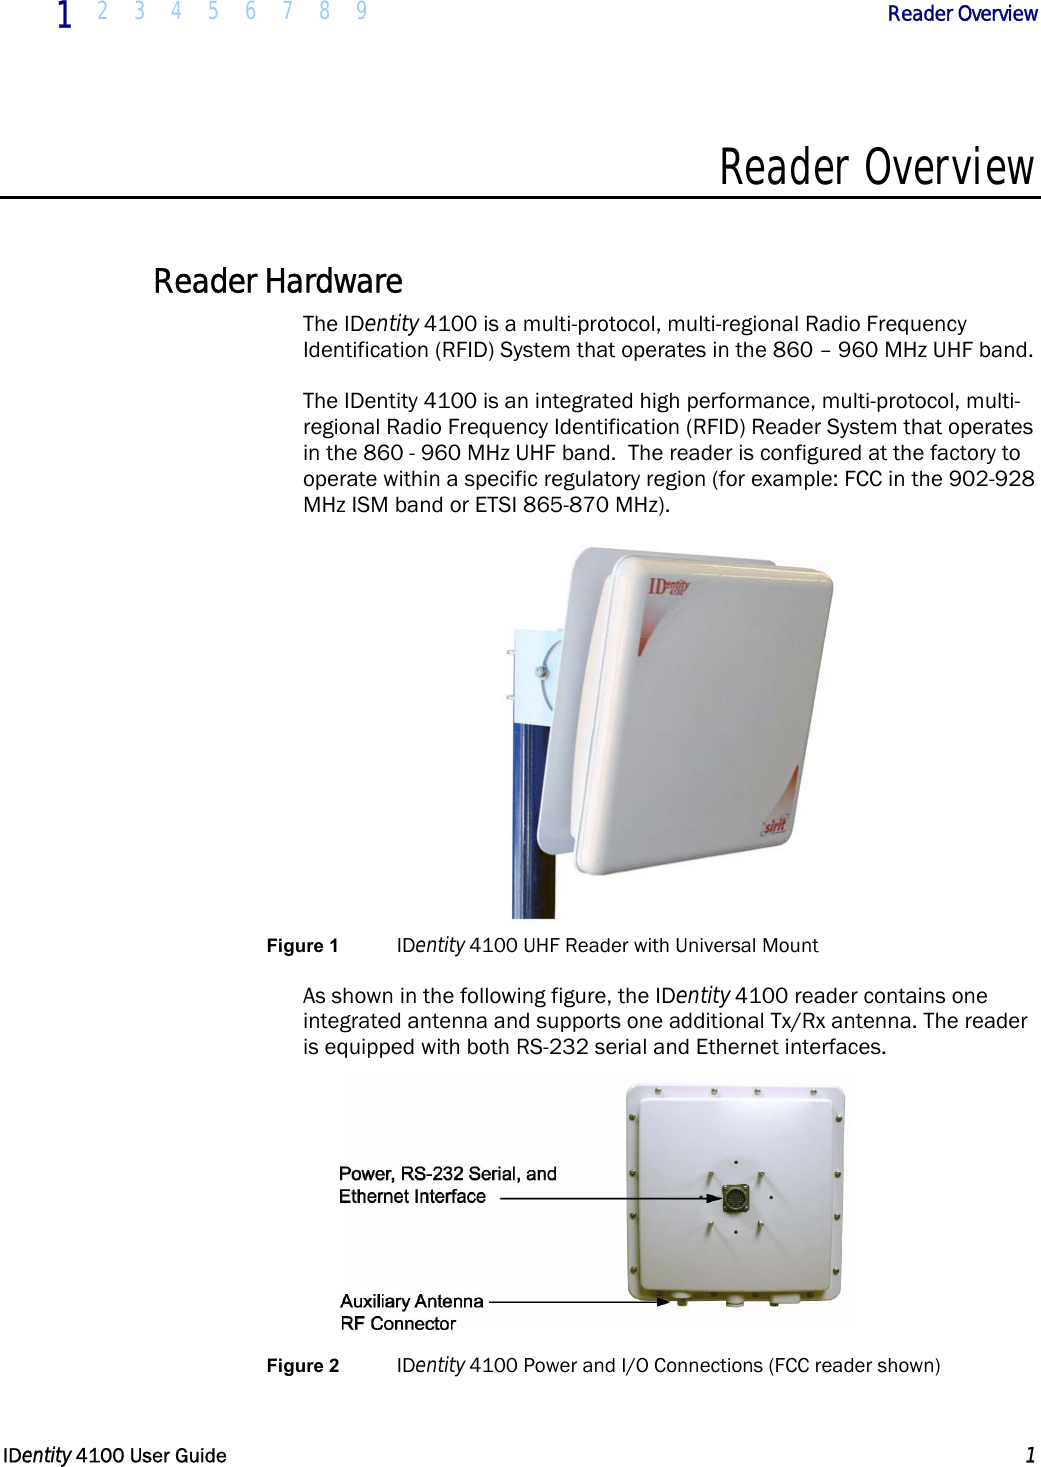  1 2 3 4 5 6 7 8 9            Reader Overview   IDentity 4100 User Guide  1  Reader Overview  Reader Hardware The IDentity 4100 is a multi-protocol, multi-regional Radio Frequency Identification (RFID) System that operates in the 860 – 960 MHz UHF band.  The IDentity 4100 is an integrated high performance, multi-protocol, multi-regional Radio Frequency Identification (RFID) Reader System that operates in the 860 - 960 MHz UHF band.  The reader is configured at the factory to operate within a specific regulatory region (for example: FCC in the 902-928 MHz ISM band or ETSI 865-870 MHz).  Figure 1 IDentity 4100 UHF Reader with Universal Mount As shown in the following figure, the IDentity 4100 reader contains one integrated antenna and supports one additional Tx/Rx antenna. The reader is equipped with both RS-232 serial and Ethernet interfaces.  Figure 2 IDentity 4100 Power and I/O Connections (FCC reader shown) 